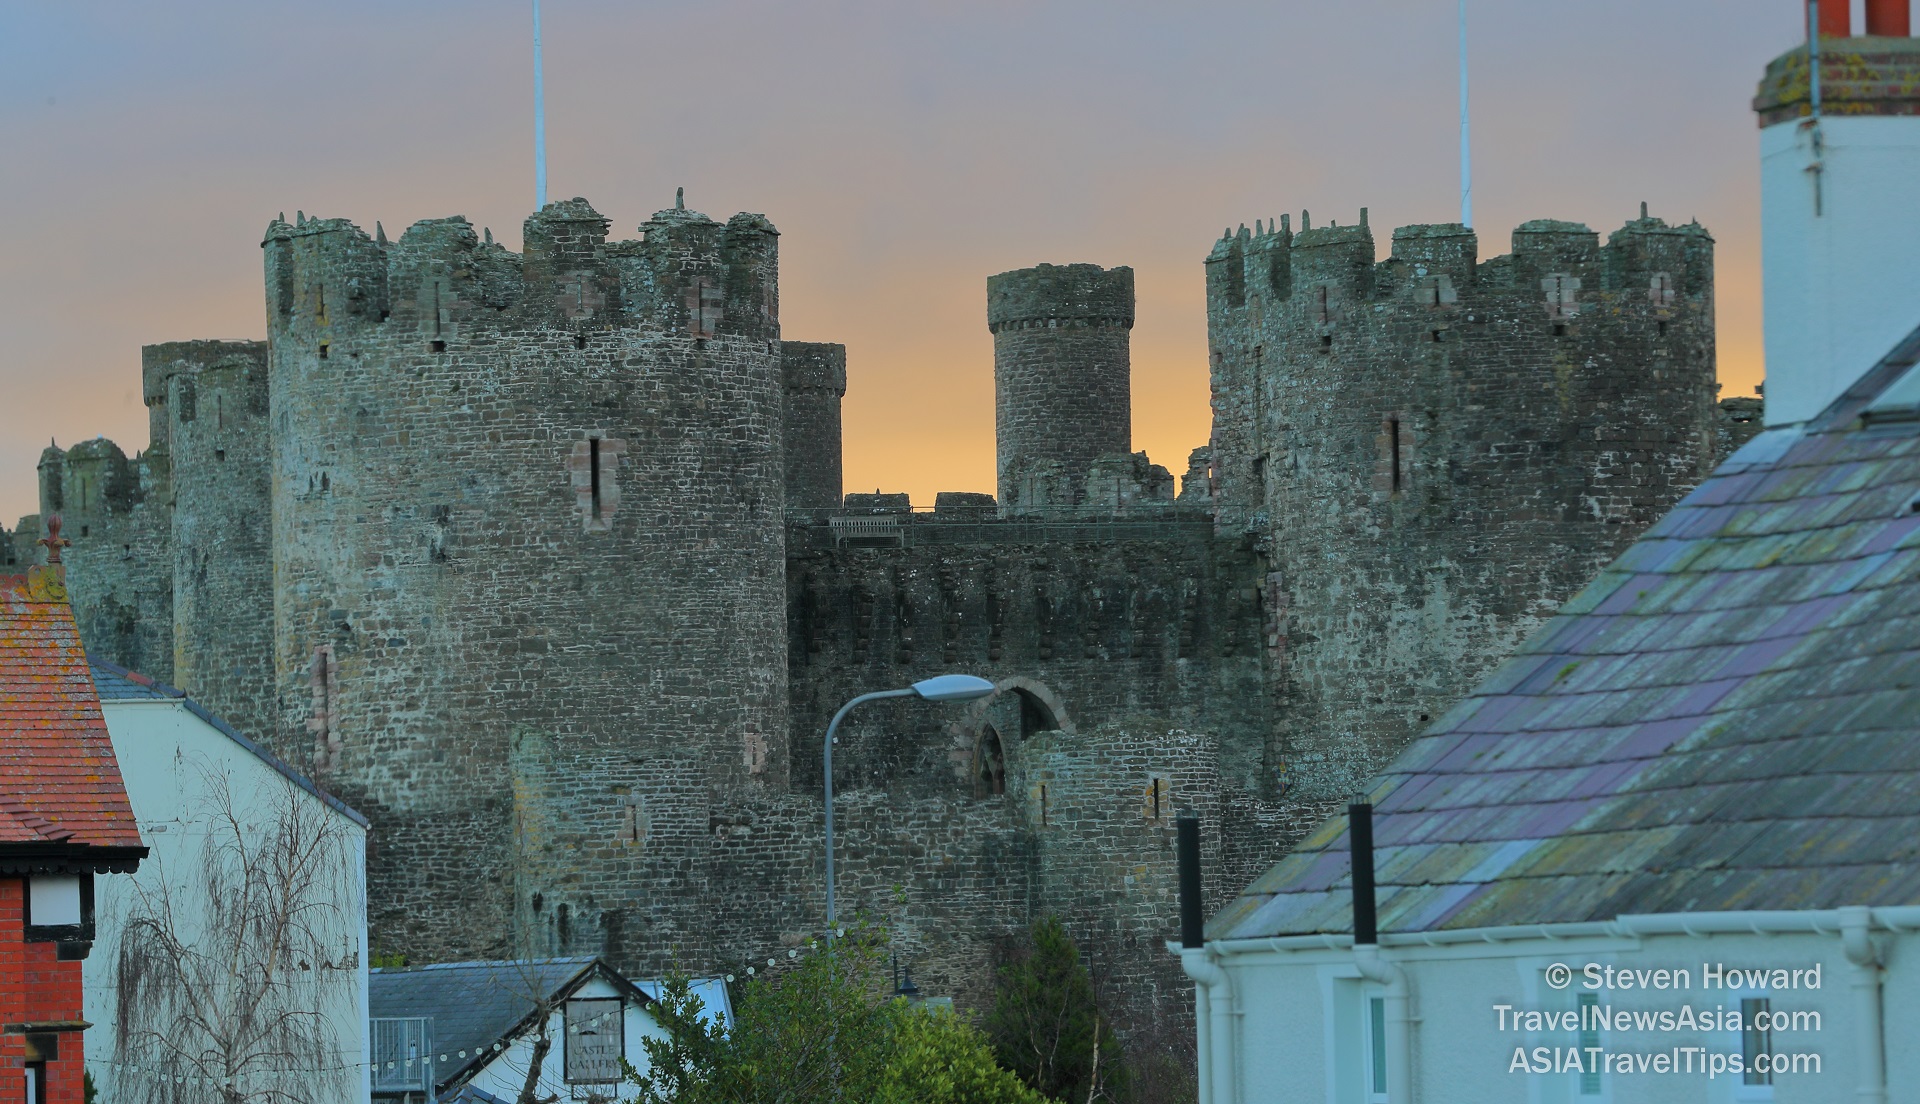 Conwy, North Wales. Picture by Steven Howard of TravelNewsAsia.com Click to enlarge.